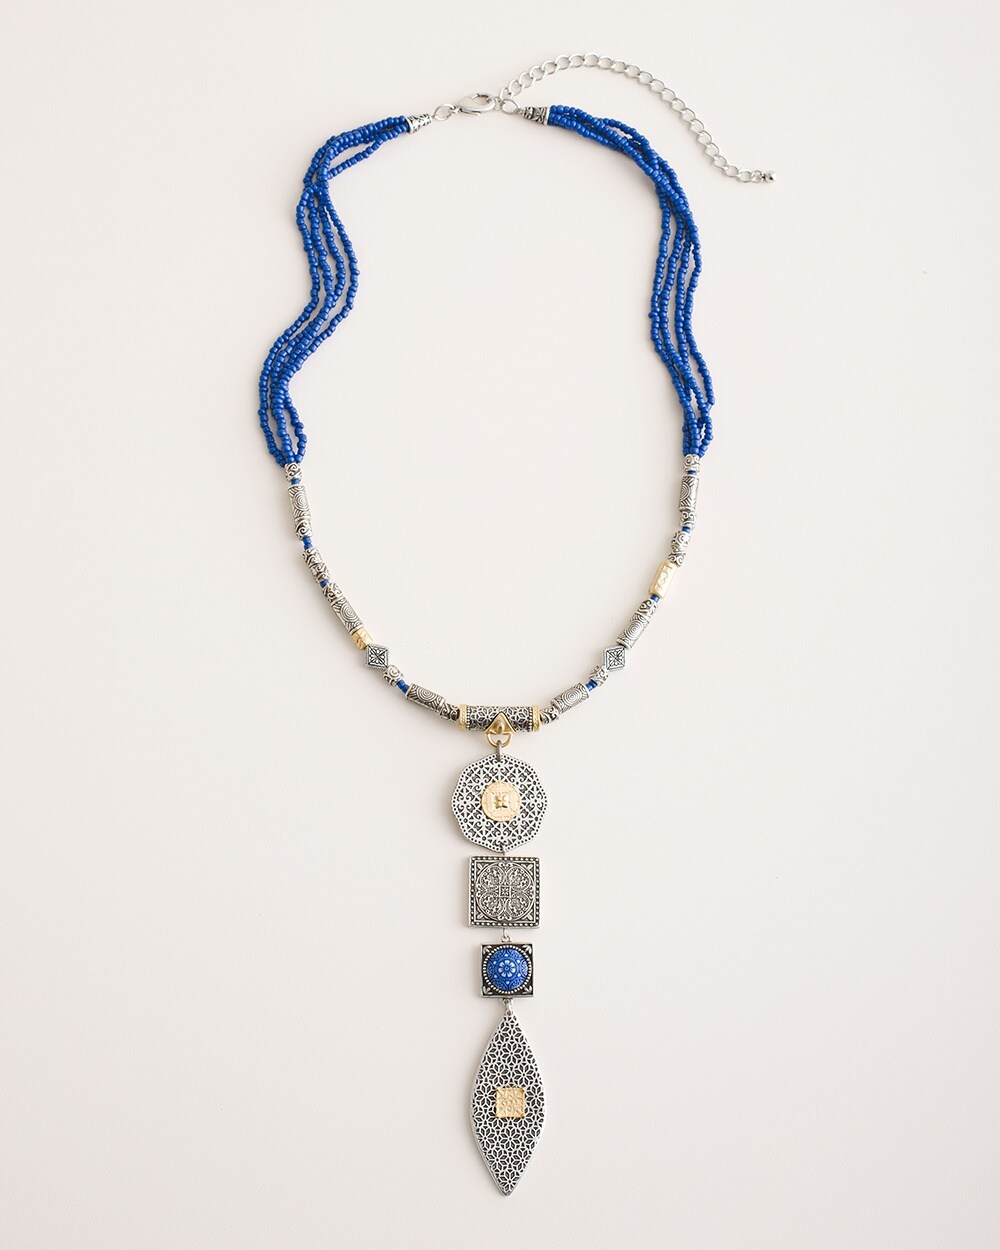 Reversible Blue Seed Bead Pendant Necklace